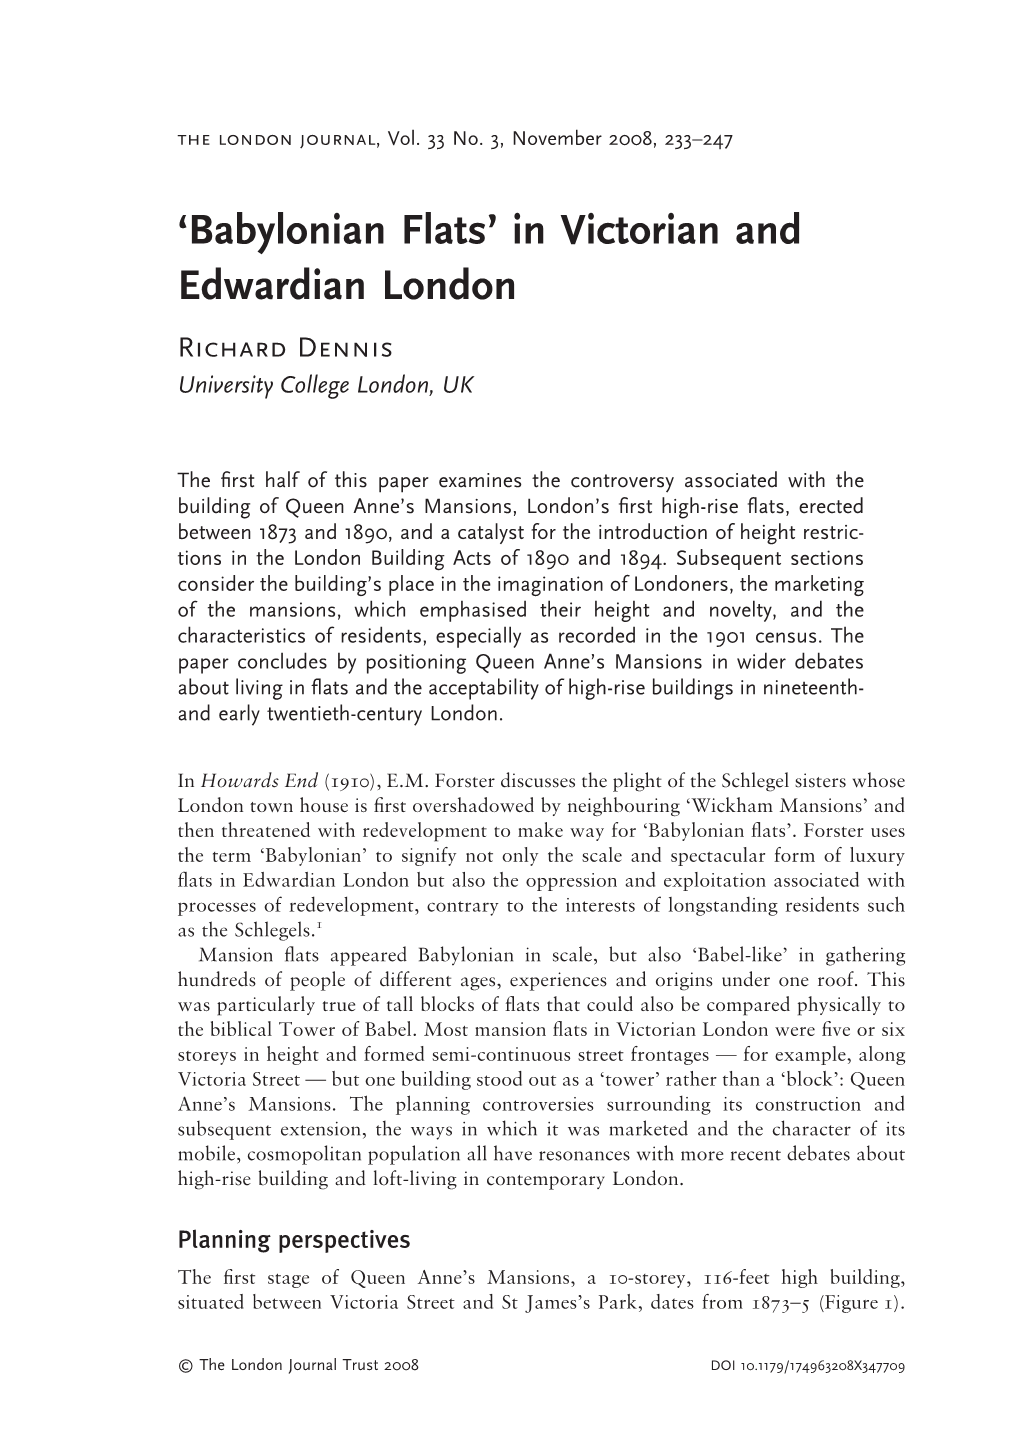 'Babylonian Flats' in Victorian and Edwardian London